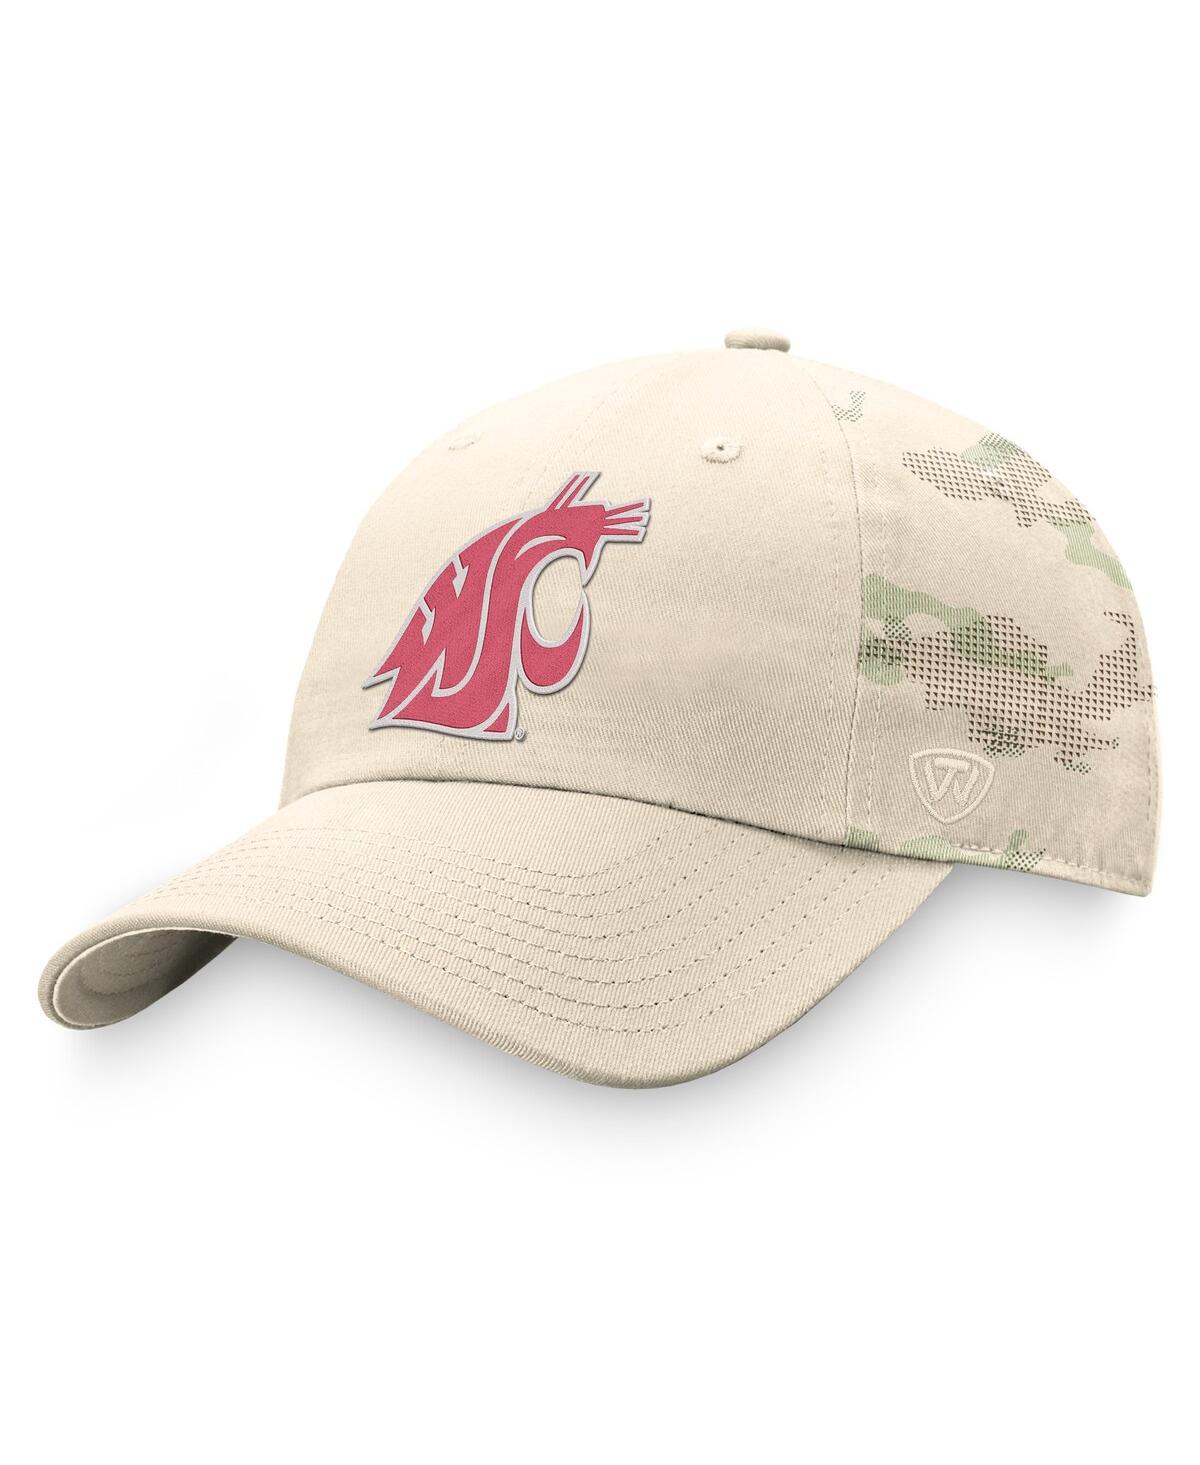 Shop Top Of The World Men's  Khaki Washington State Cougars Oht Military-inspired Appreciation Camo Dune A